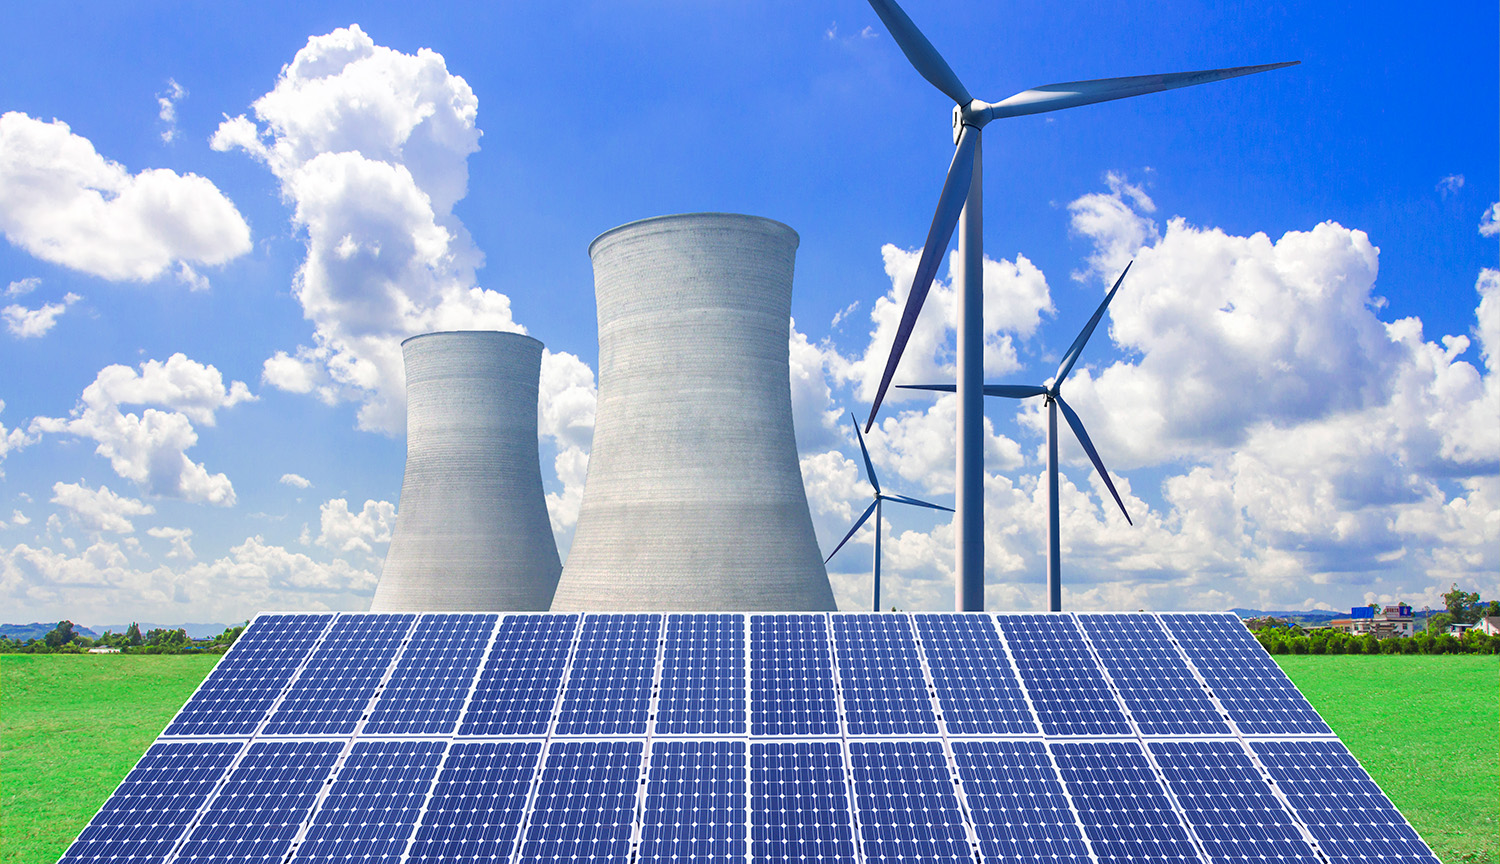 The cooling towers of a nuclear power plant rise above an array of solar panels, with wind turbines also visible